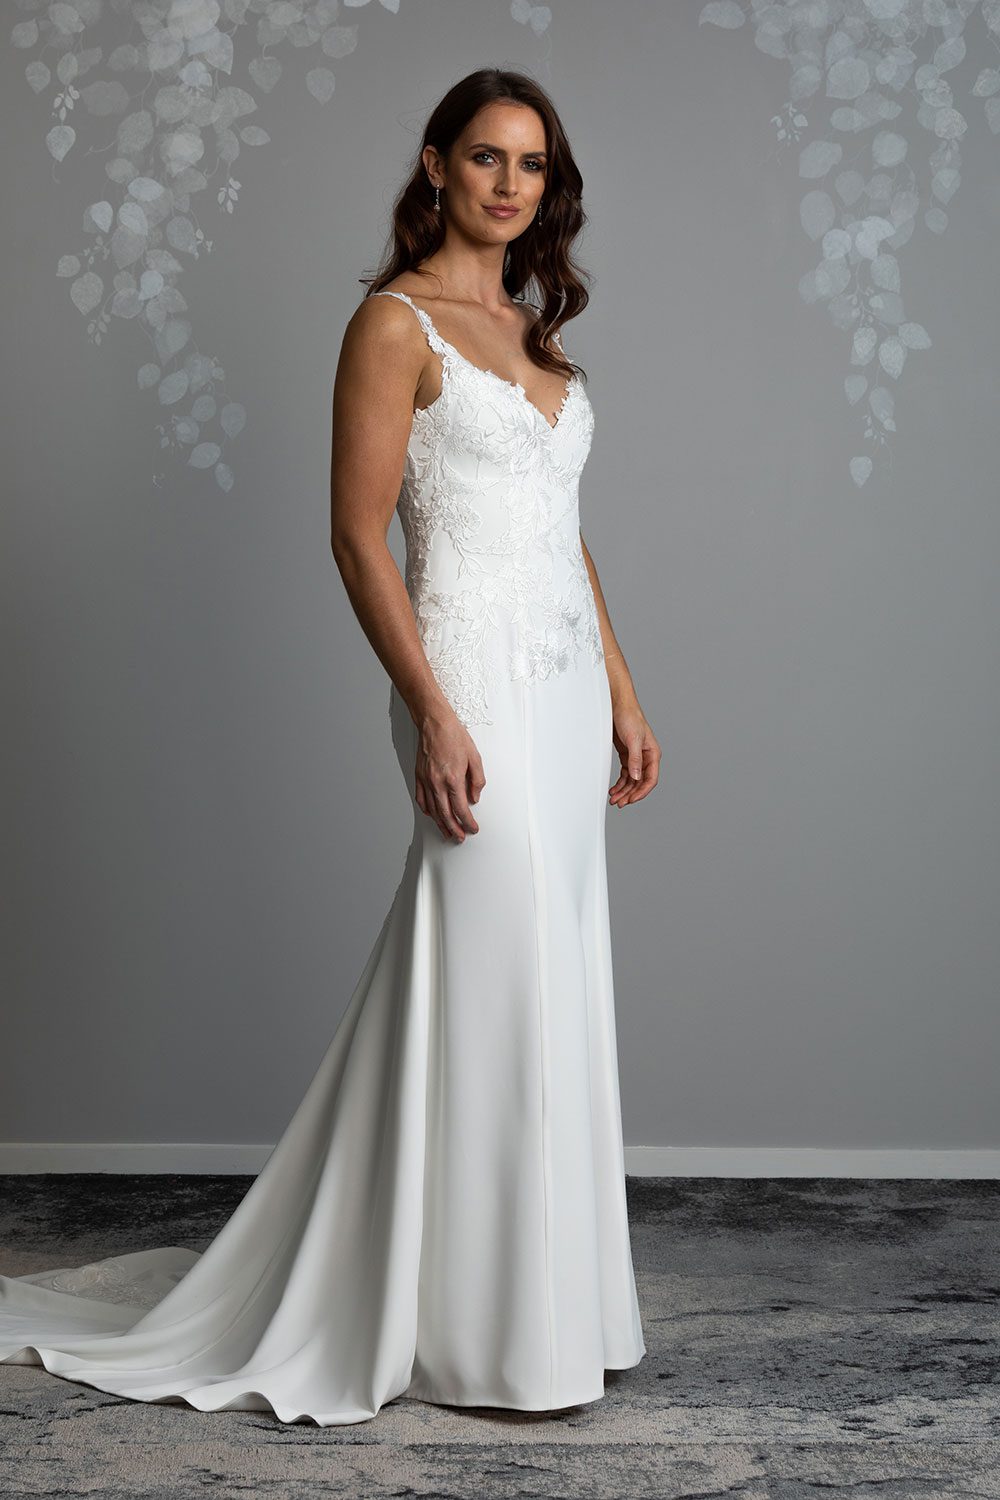 Ana Wedding gown from Vinka Design - This beautiful gown is graced by hand-appliqued delicate floral leaf lace, subtly worked into the front of the bodice and more prominently on the back. A fit-and-flare cut shapes the figure. Profile of front of the gown with intricate lace detailing and sculpted panels leading to a long train